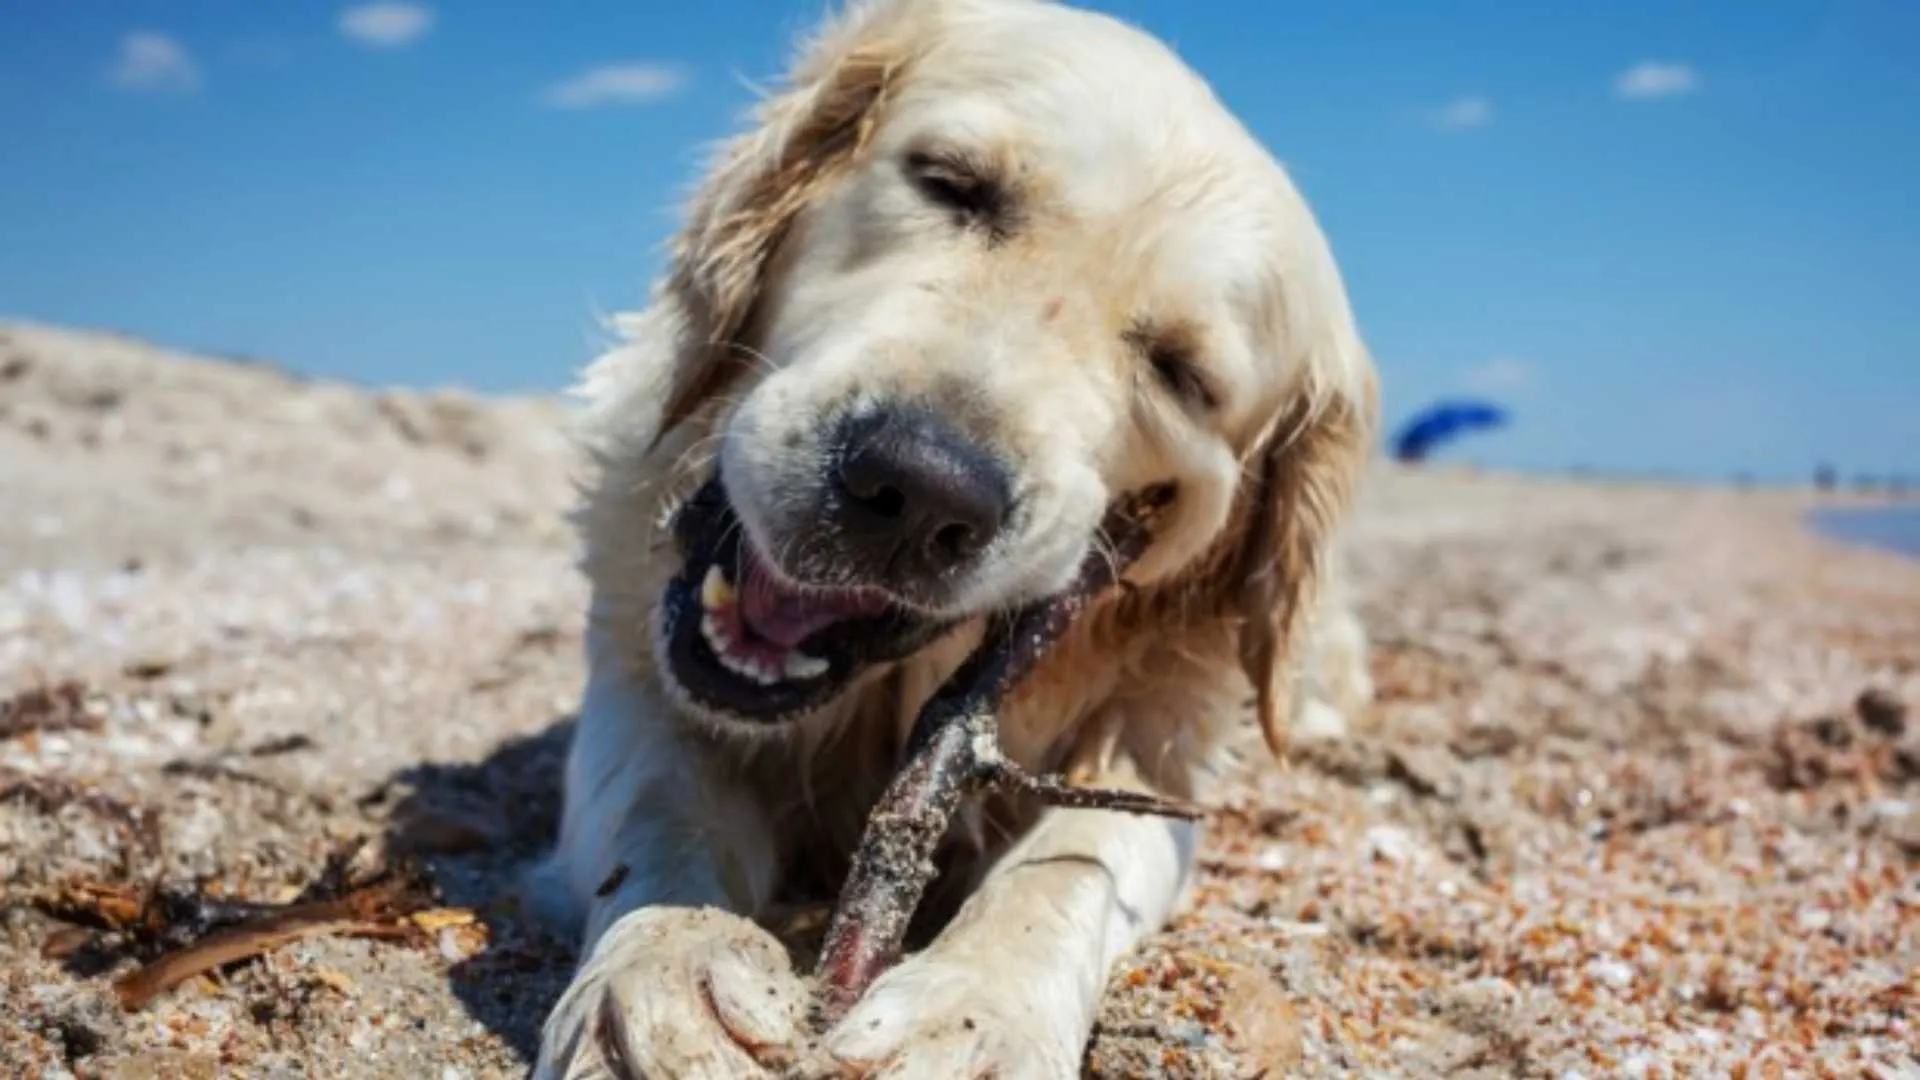 Dog chewing on driftwood in the shore